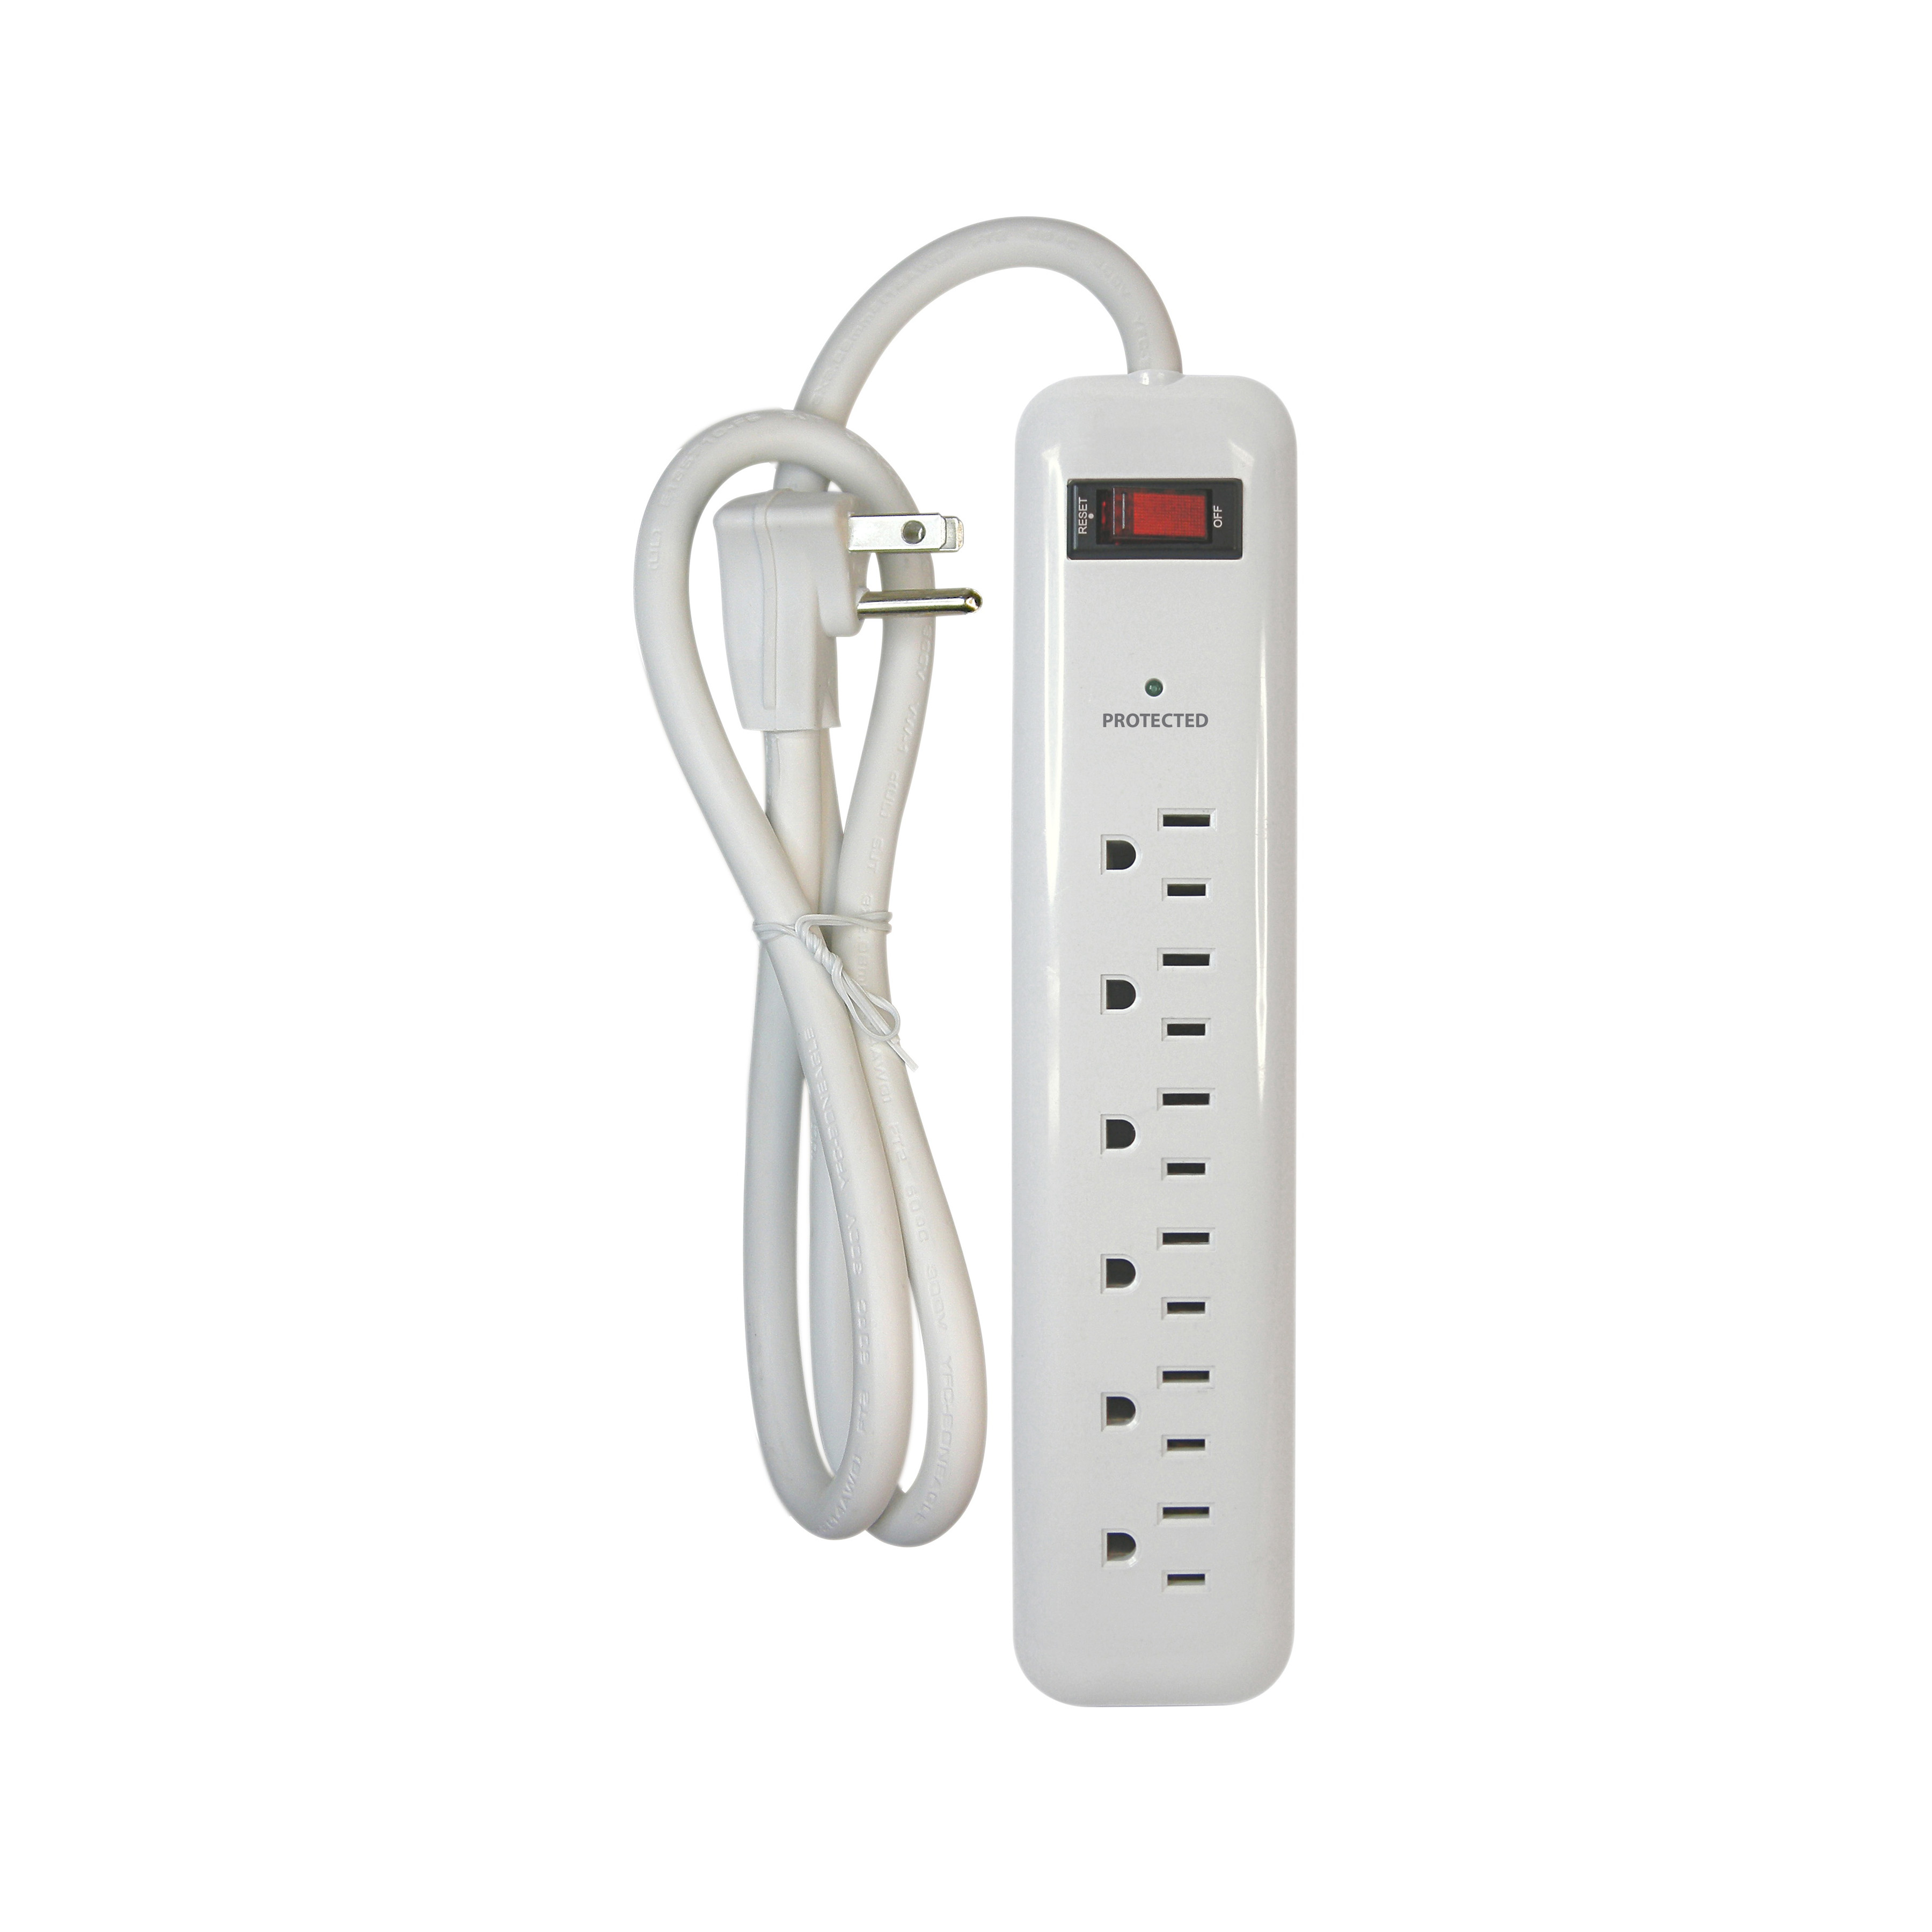 OR802126 Surge Protector Power Strip, 125 V, 15 A